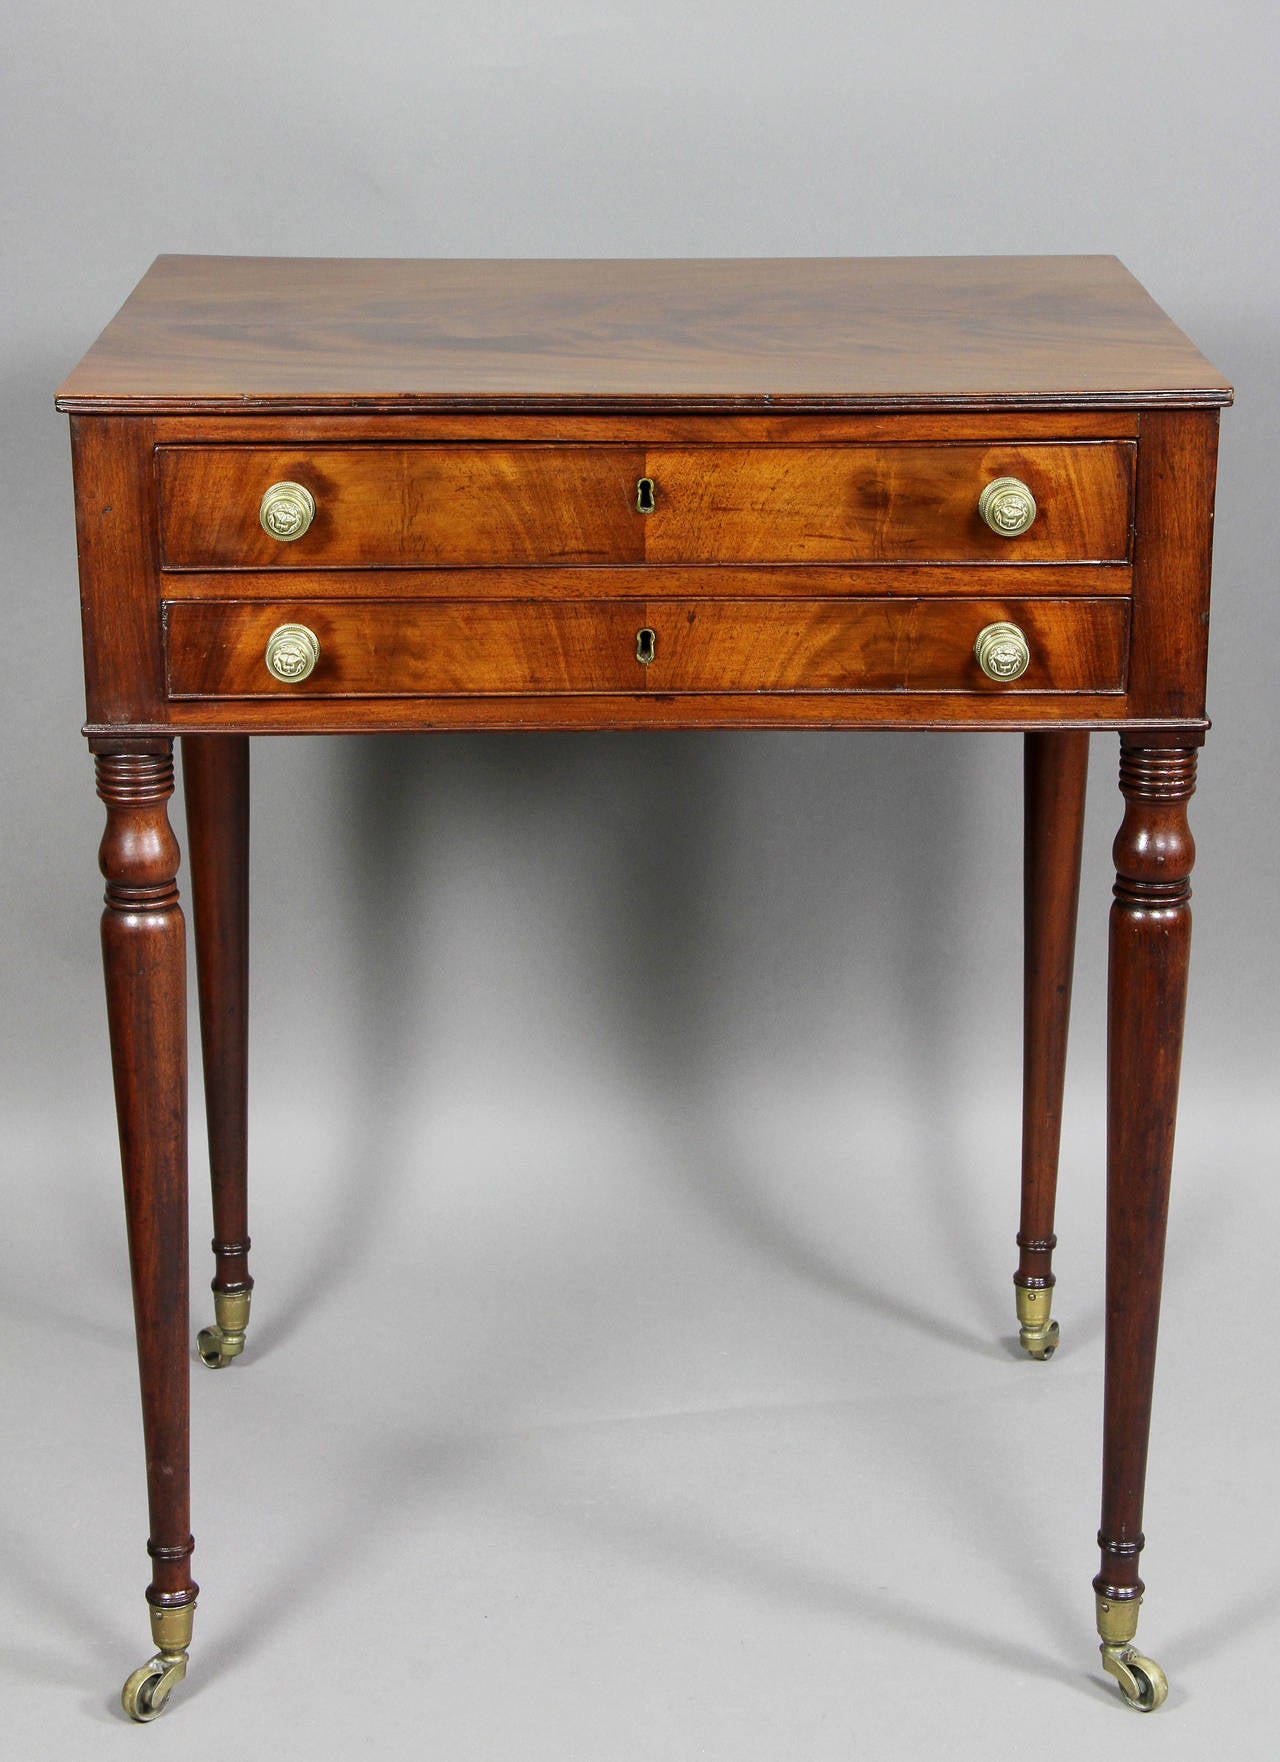 Wonderfully figured rectangular top over two drawers, raised on turned tapered legs, casters.